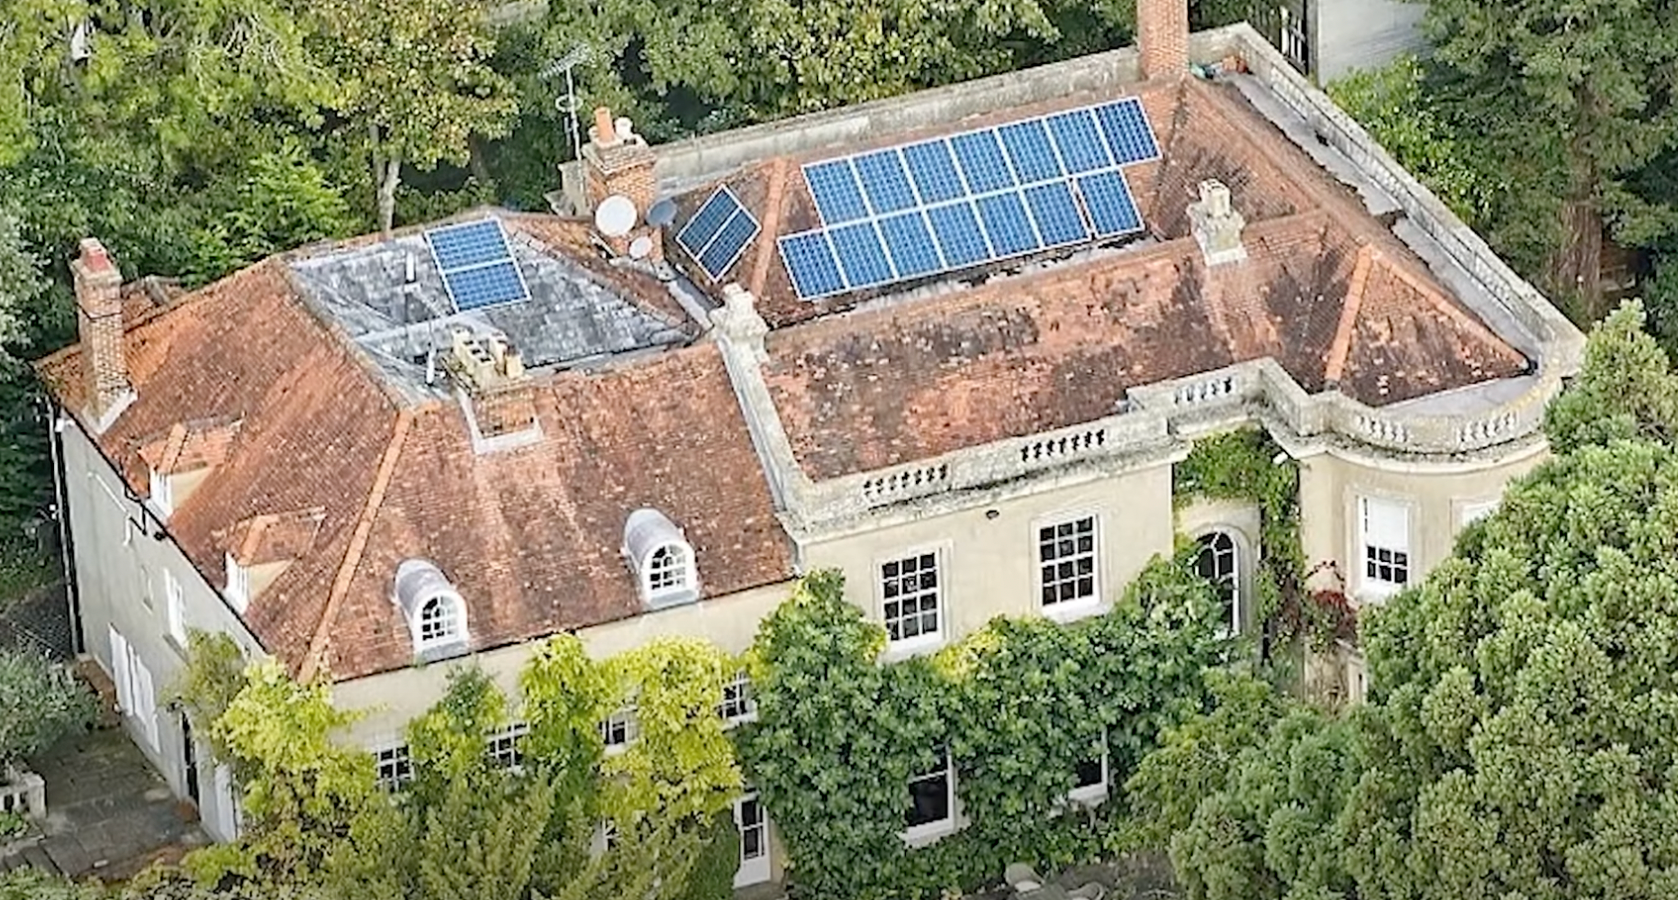 An overview of George and Amal Clooney's mansion at River Thames in London, United Kingdom | Source: YouTube/FamousEntertainment